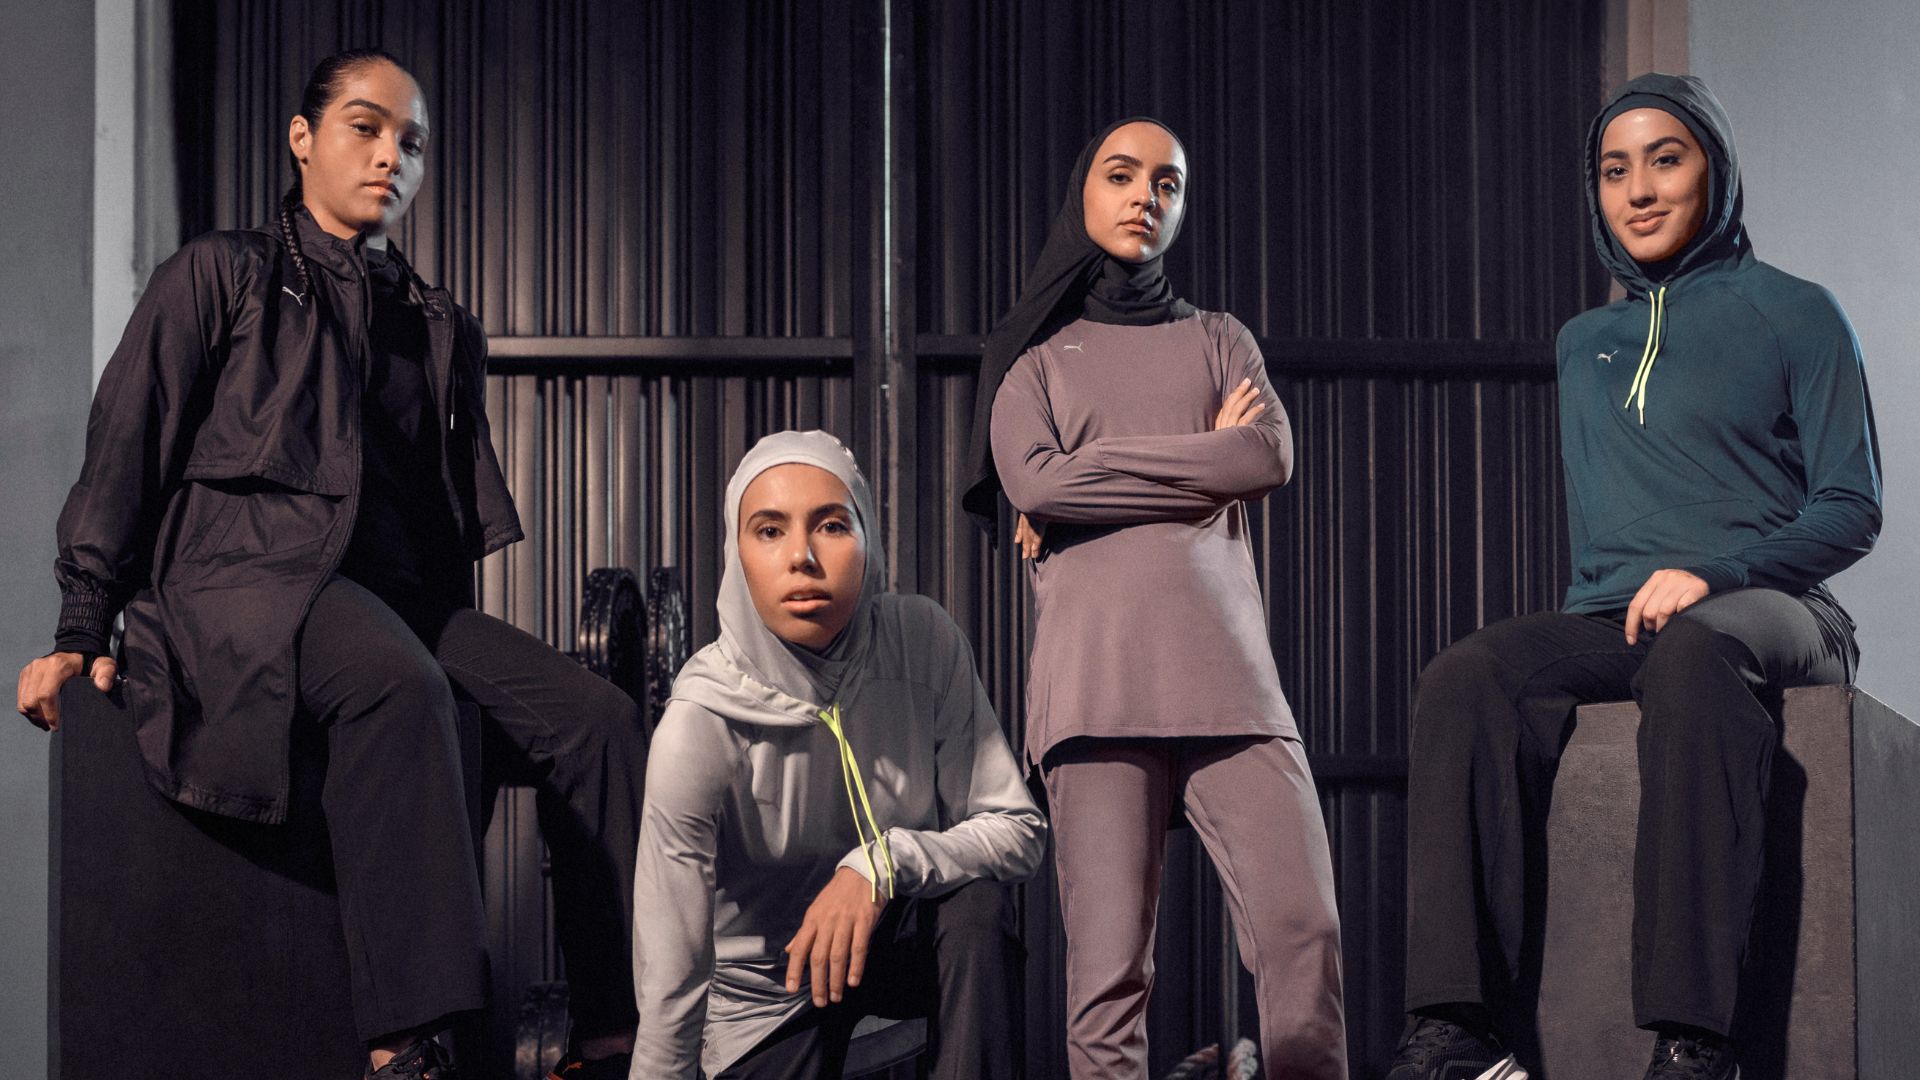 PUMA has just launched its first modest activewear collection